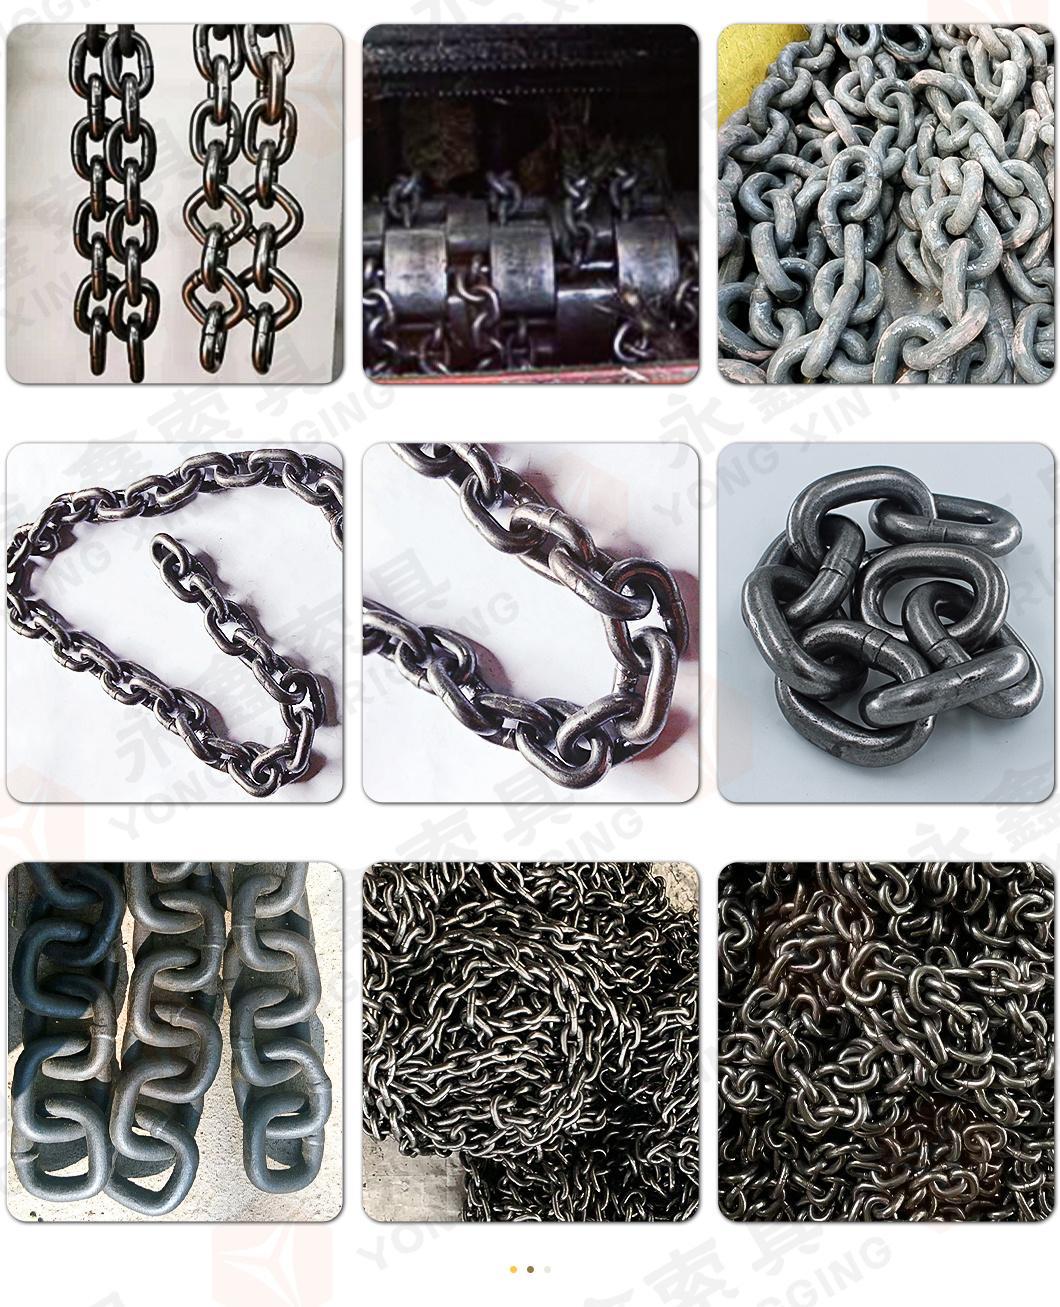 Heavy Duty Industrial G80 Znic Plated Welded Lift Lashing Hoisting Load Chain Structure